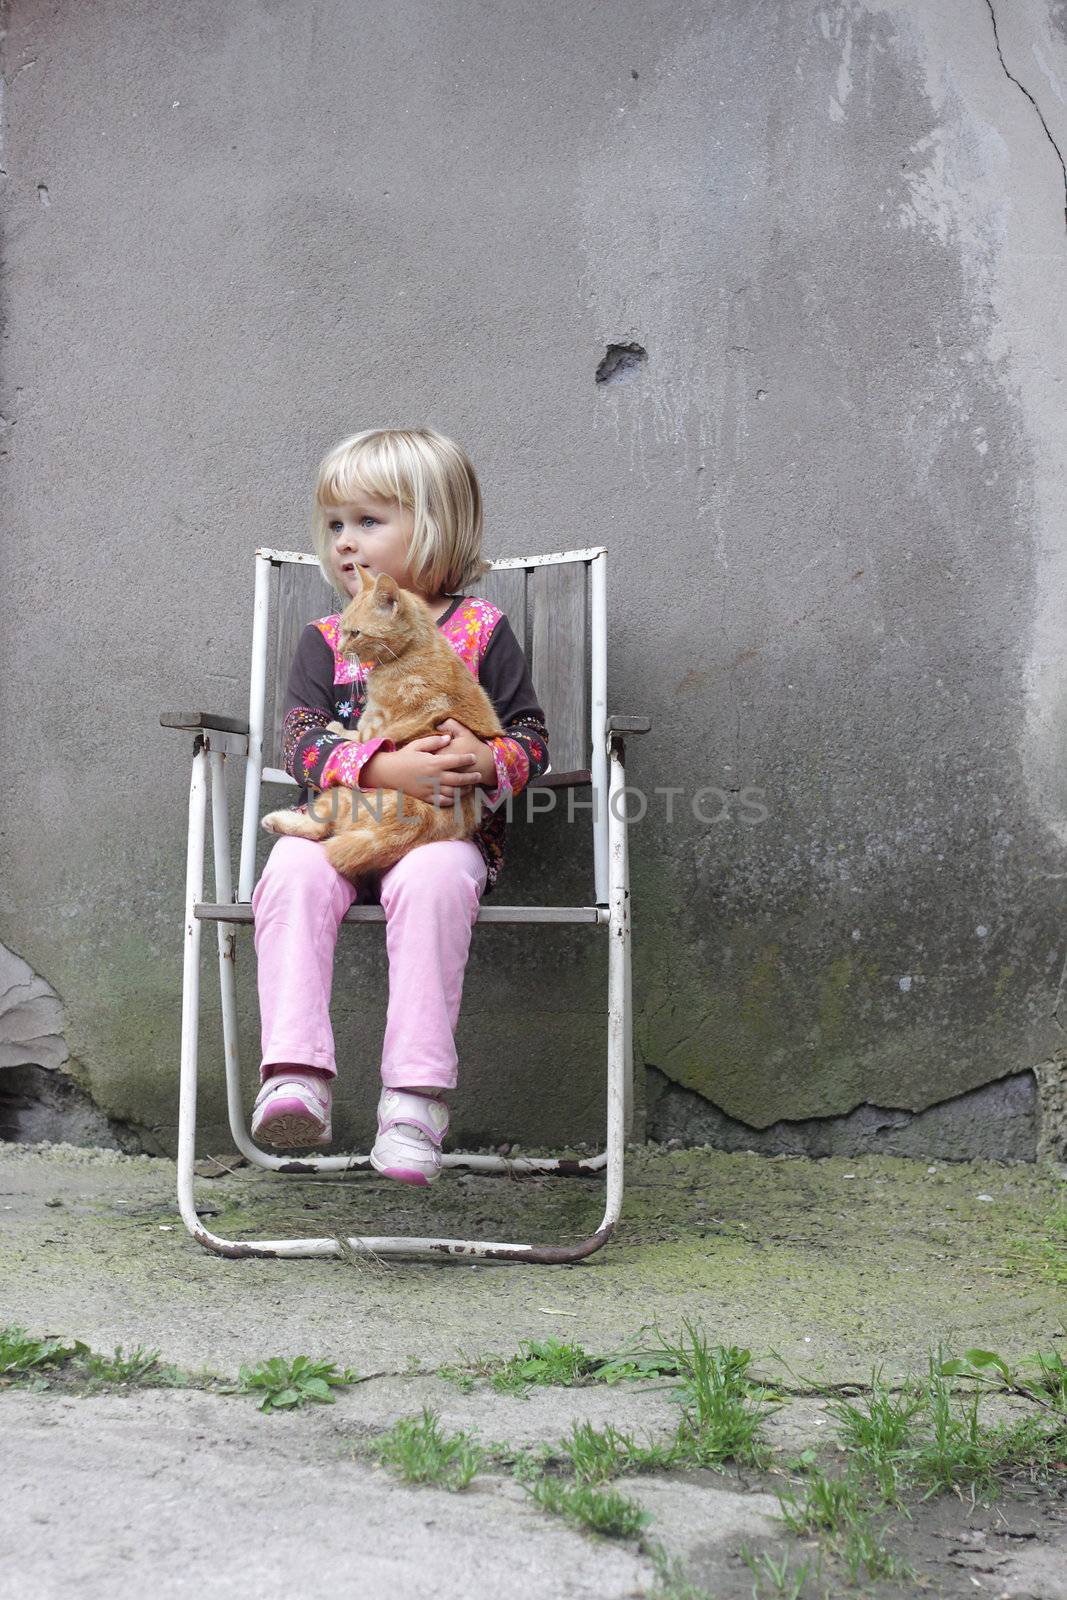 Girl sitting on a camping chair holding a ginger cat. Space for text